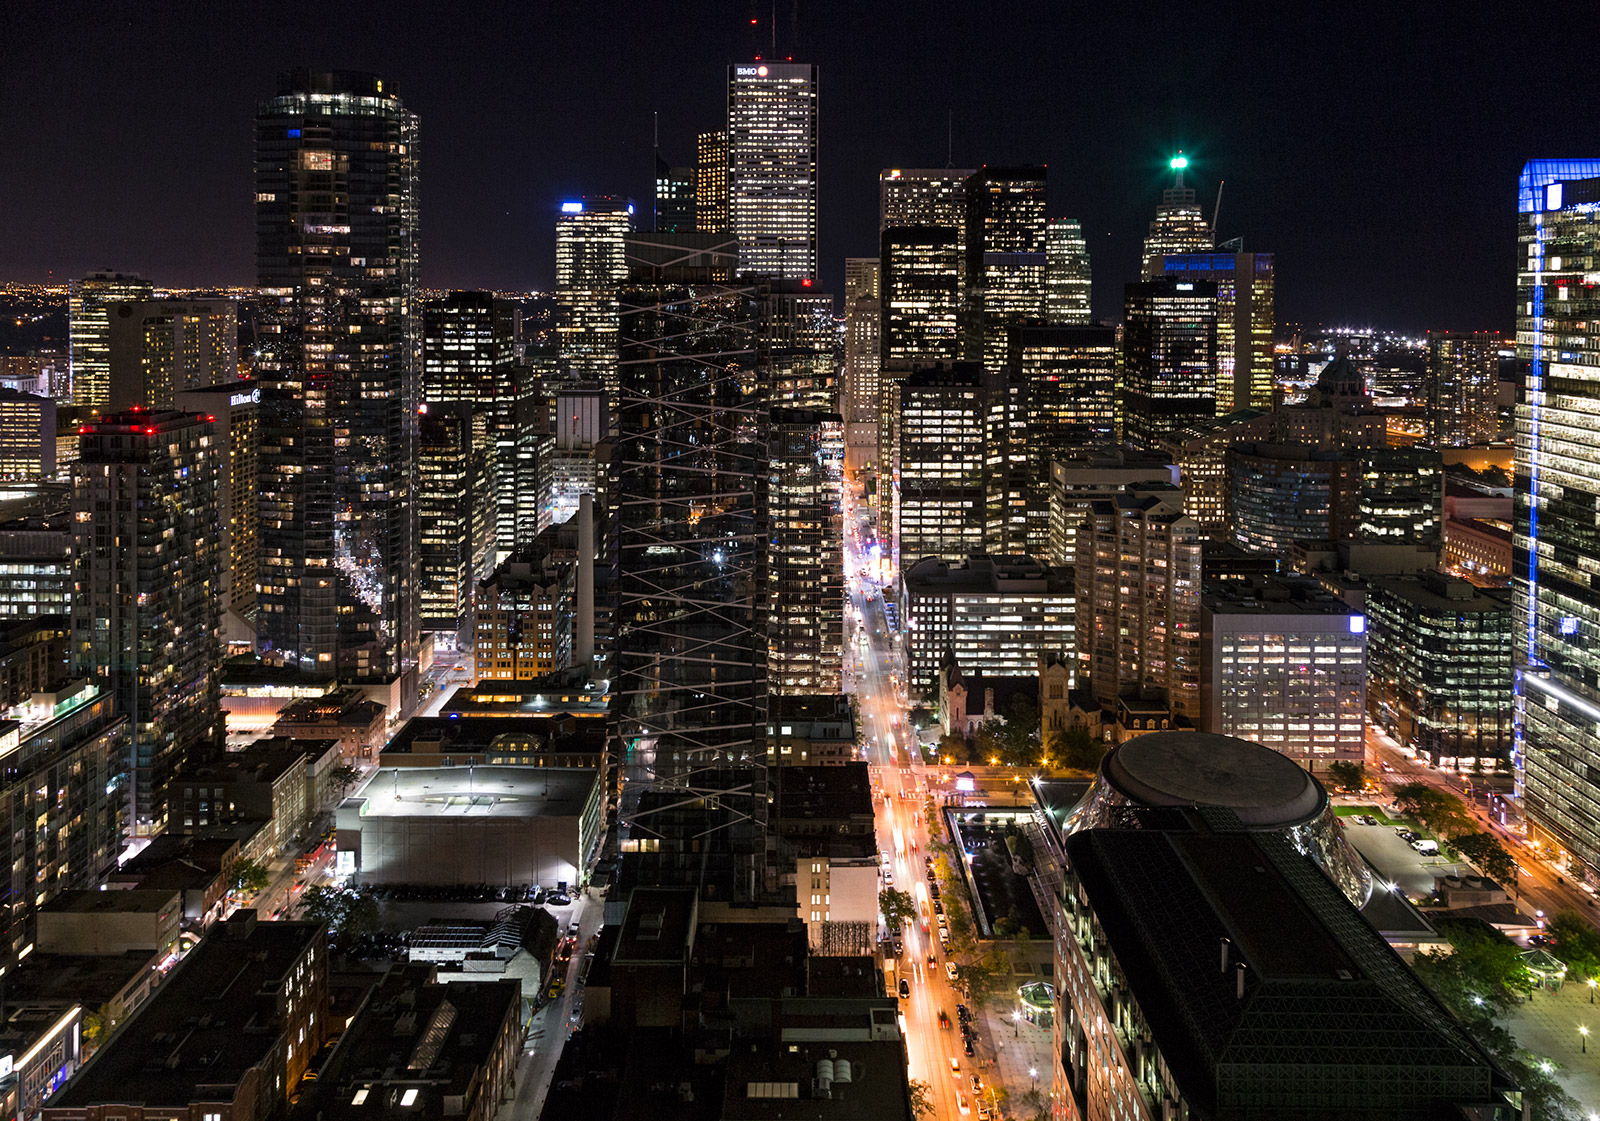 20140925. Looking east across Toronto's gleaming downtown at nig